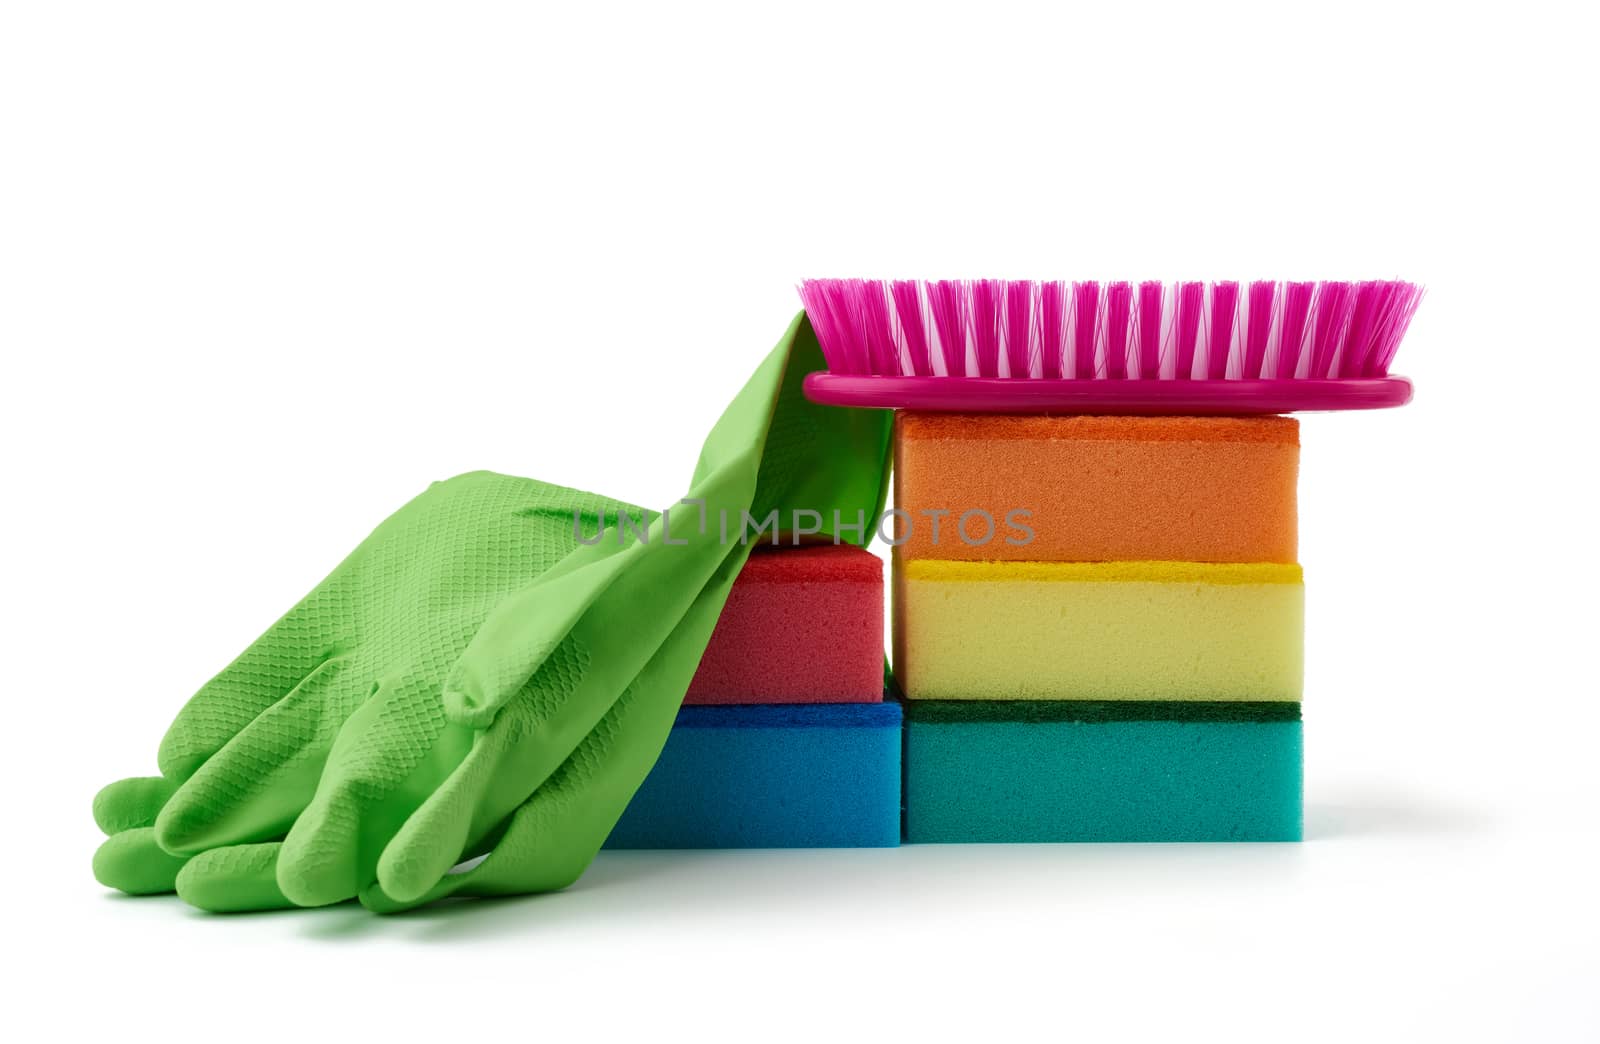 items for home cleaning: green rubber gloves, brush, multi-color by ndanko